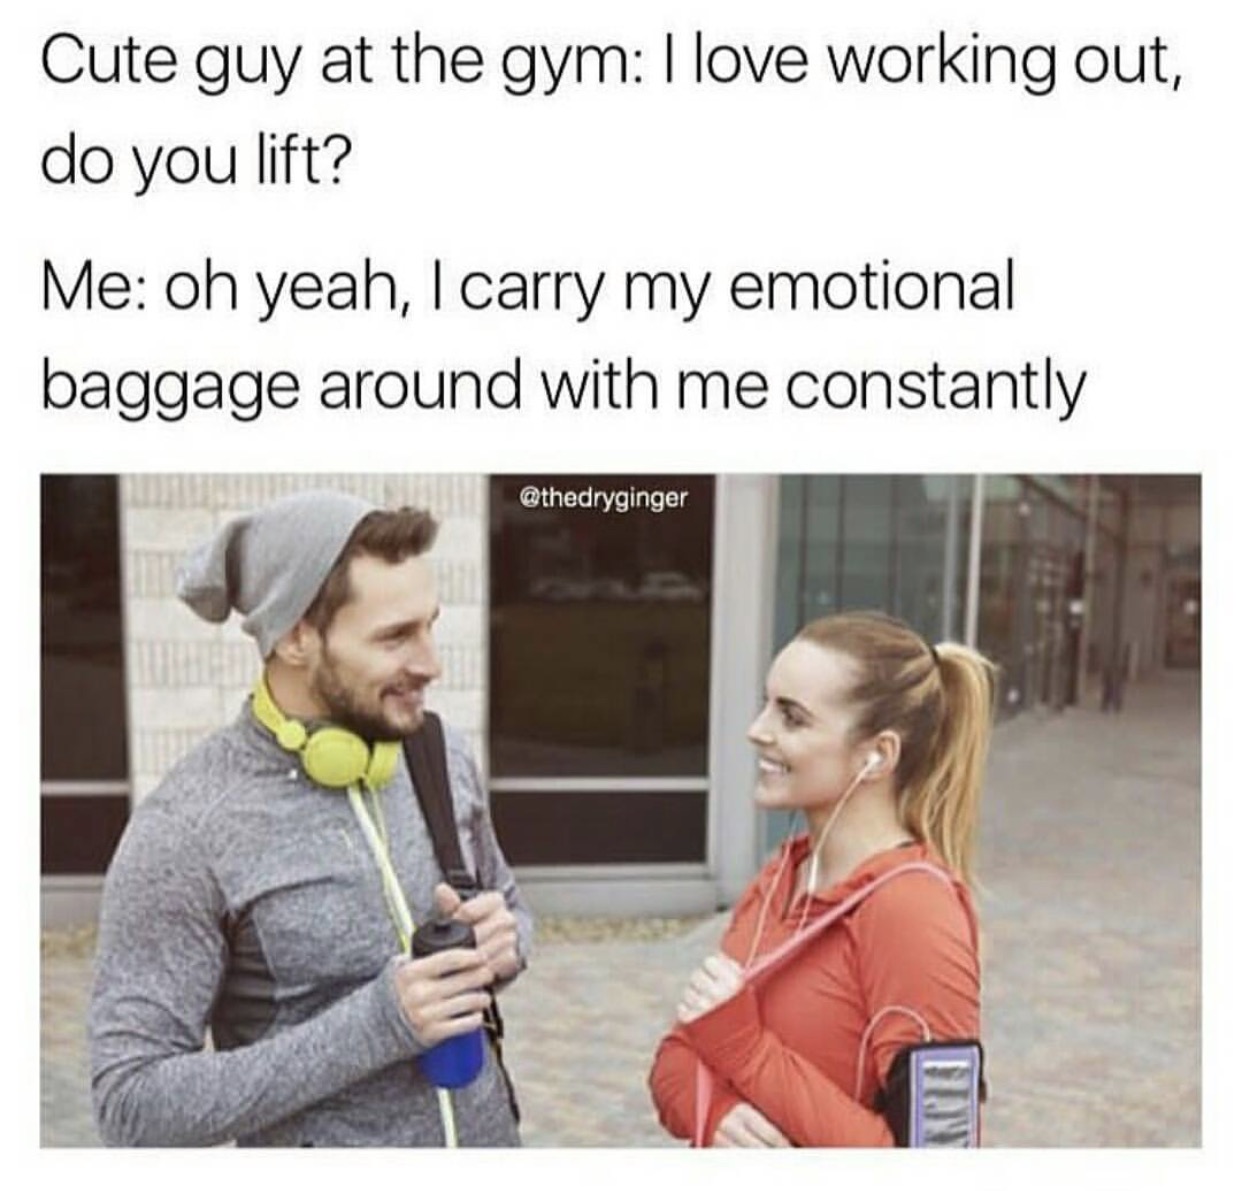 Meme of a girl flirting with a cute guy at the gym by comparing lifting weights with carrying your emotional baggage around.